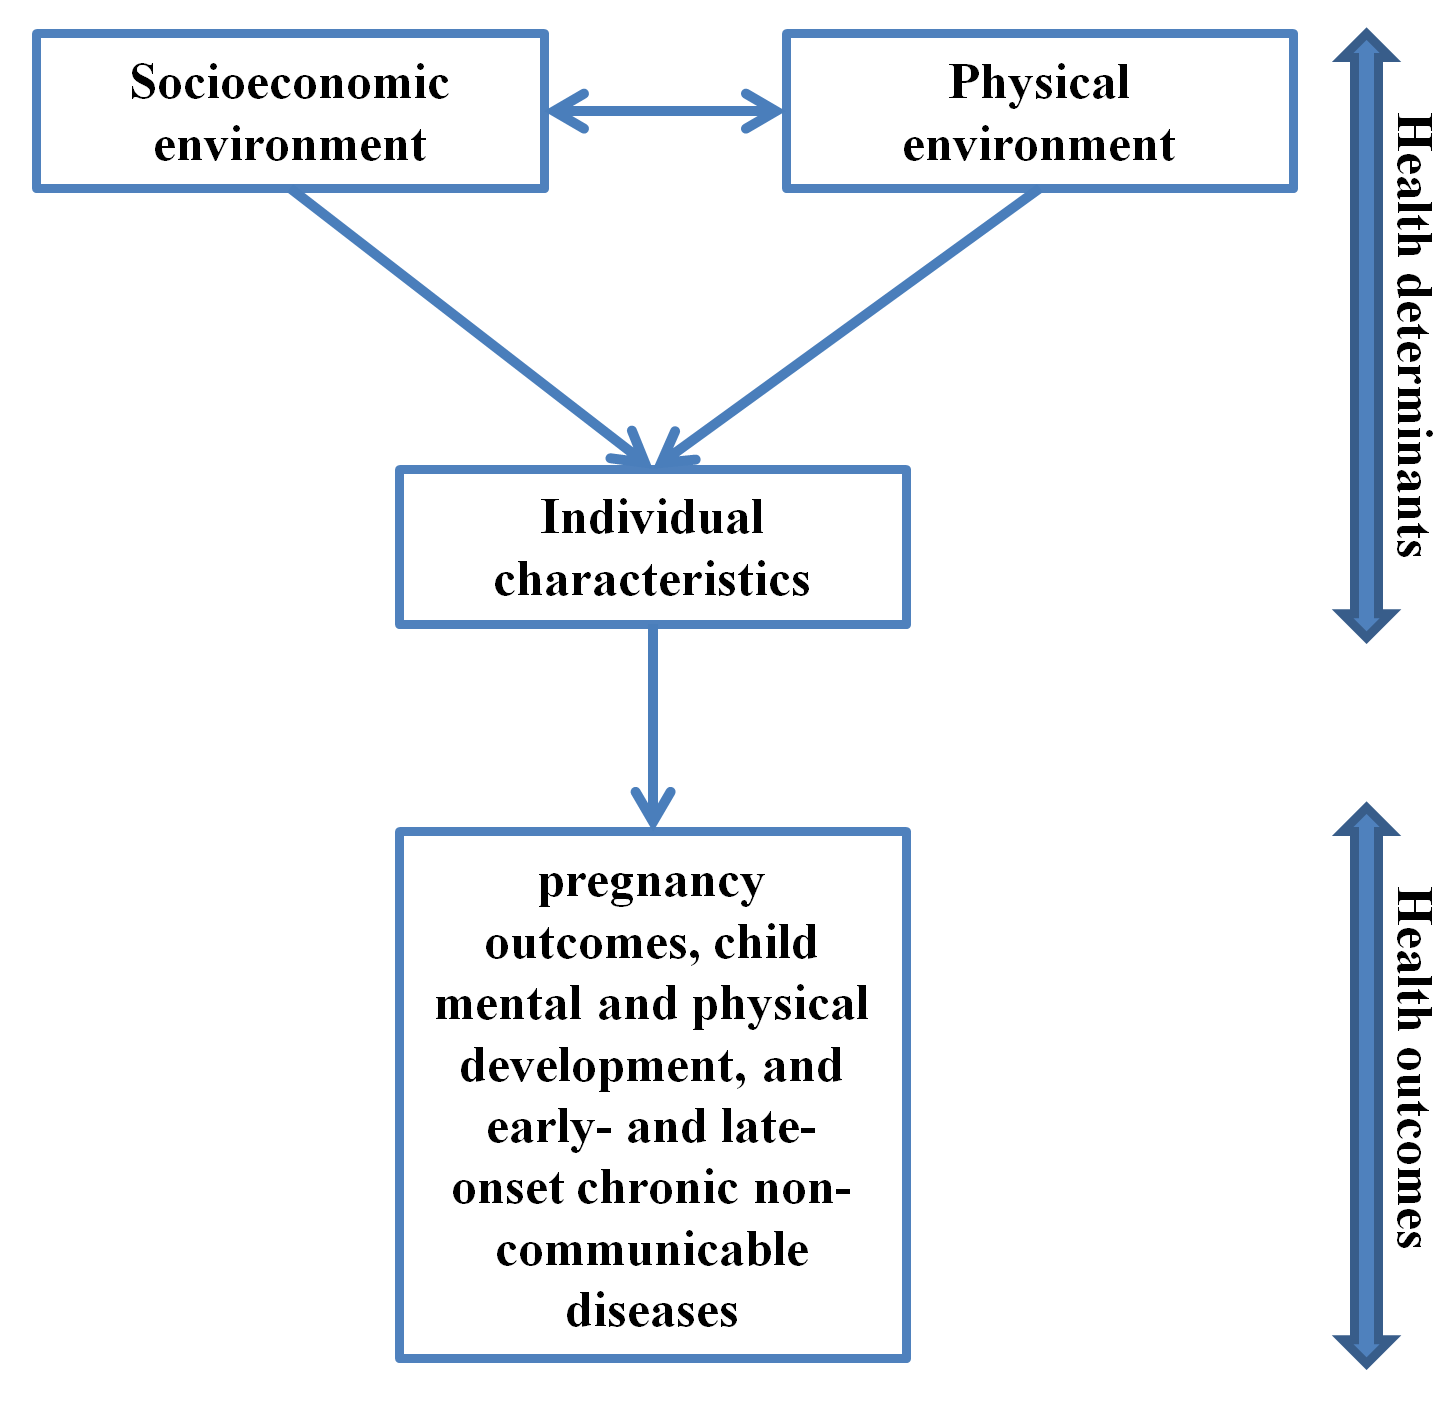 Health determinants and outcomes covered by the project